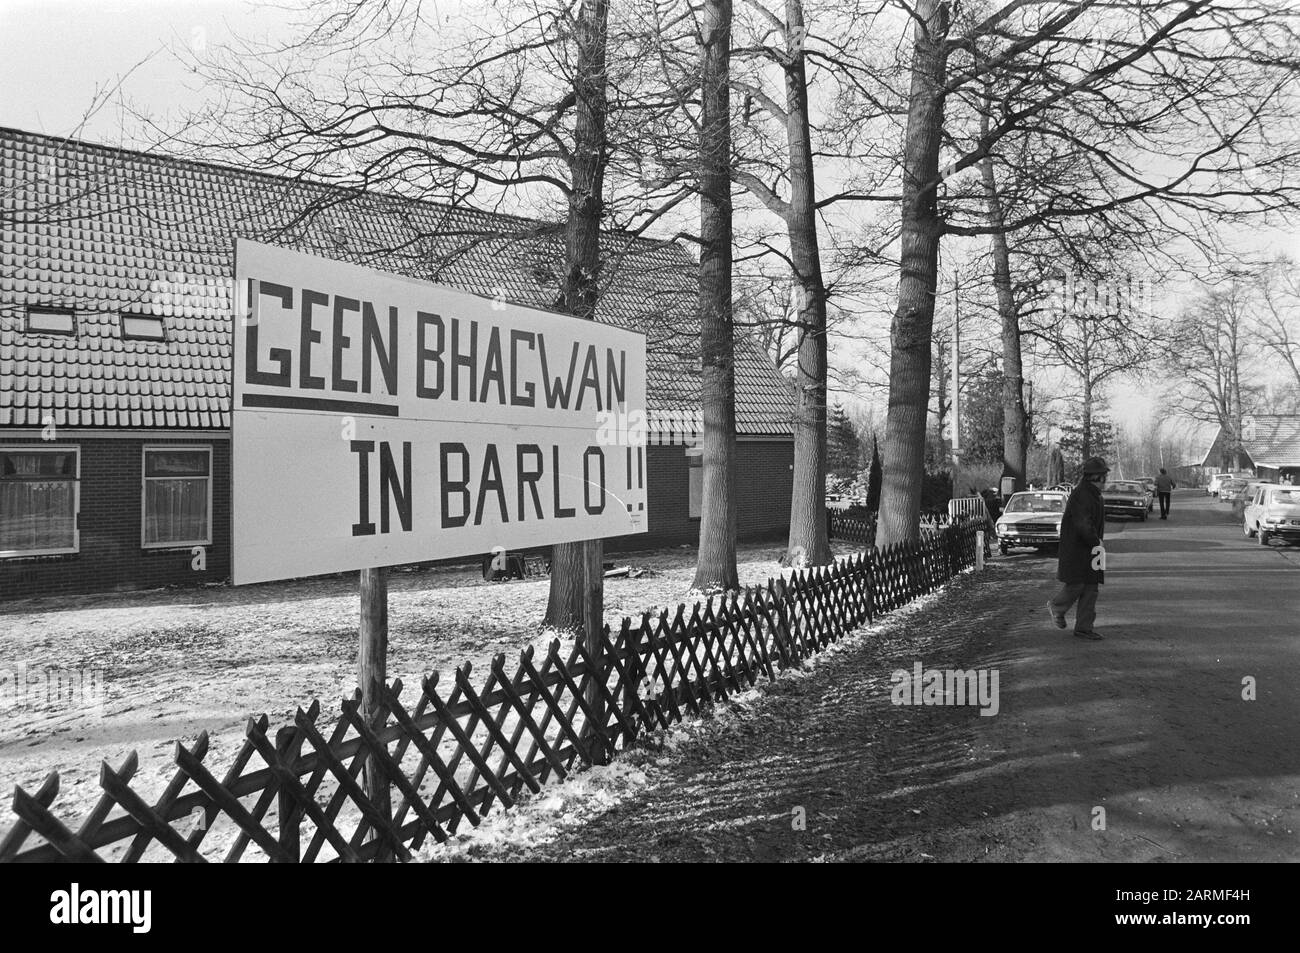 Holiday complex Groot Dunk in Barlo that the Bhagwan movement wanted to buy has burned out. Residents with sign No Bhagwan in Barlo Date: January 10, 1982 Location: Barlo Keywords: plates Stock Photo